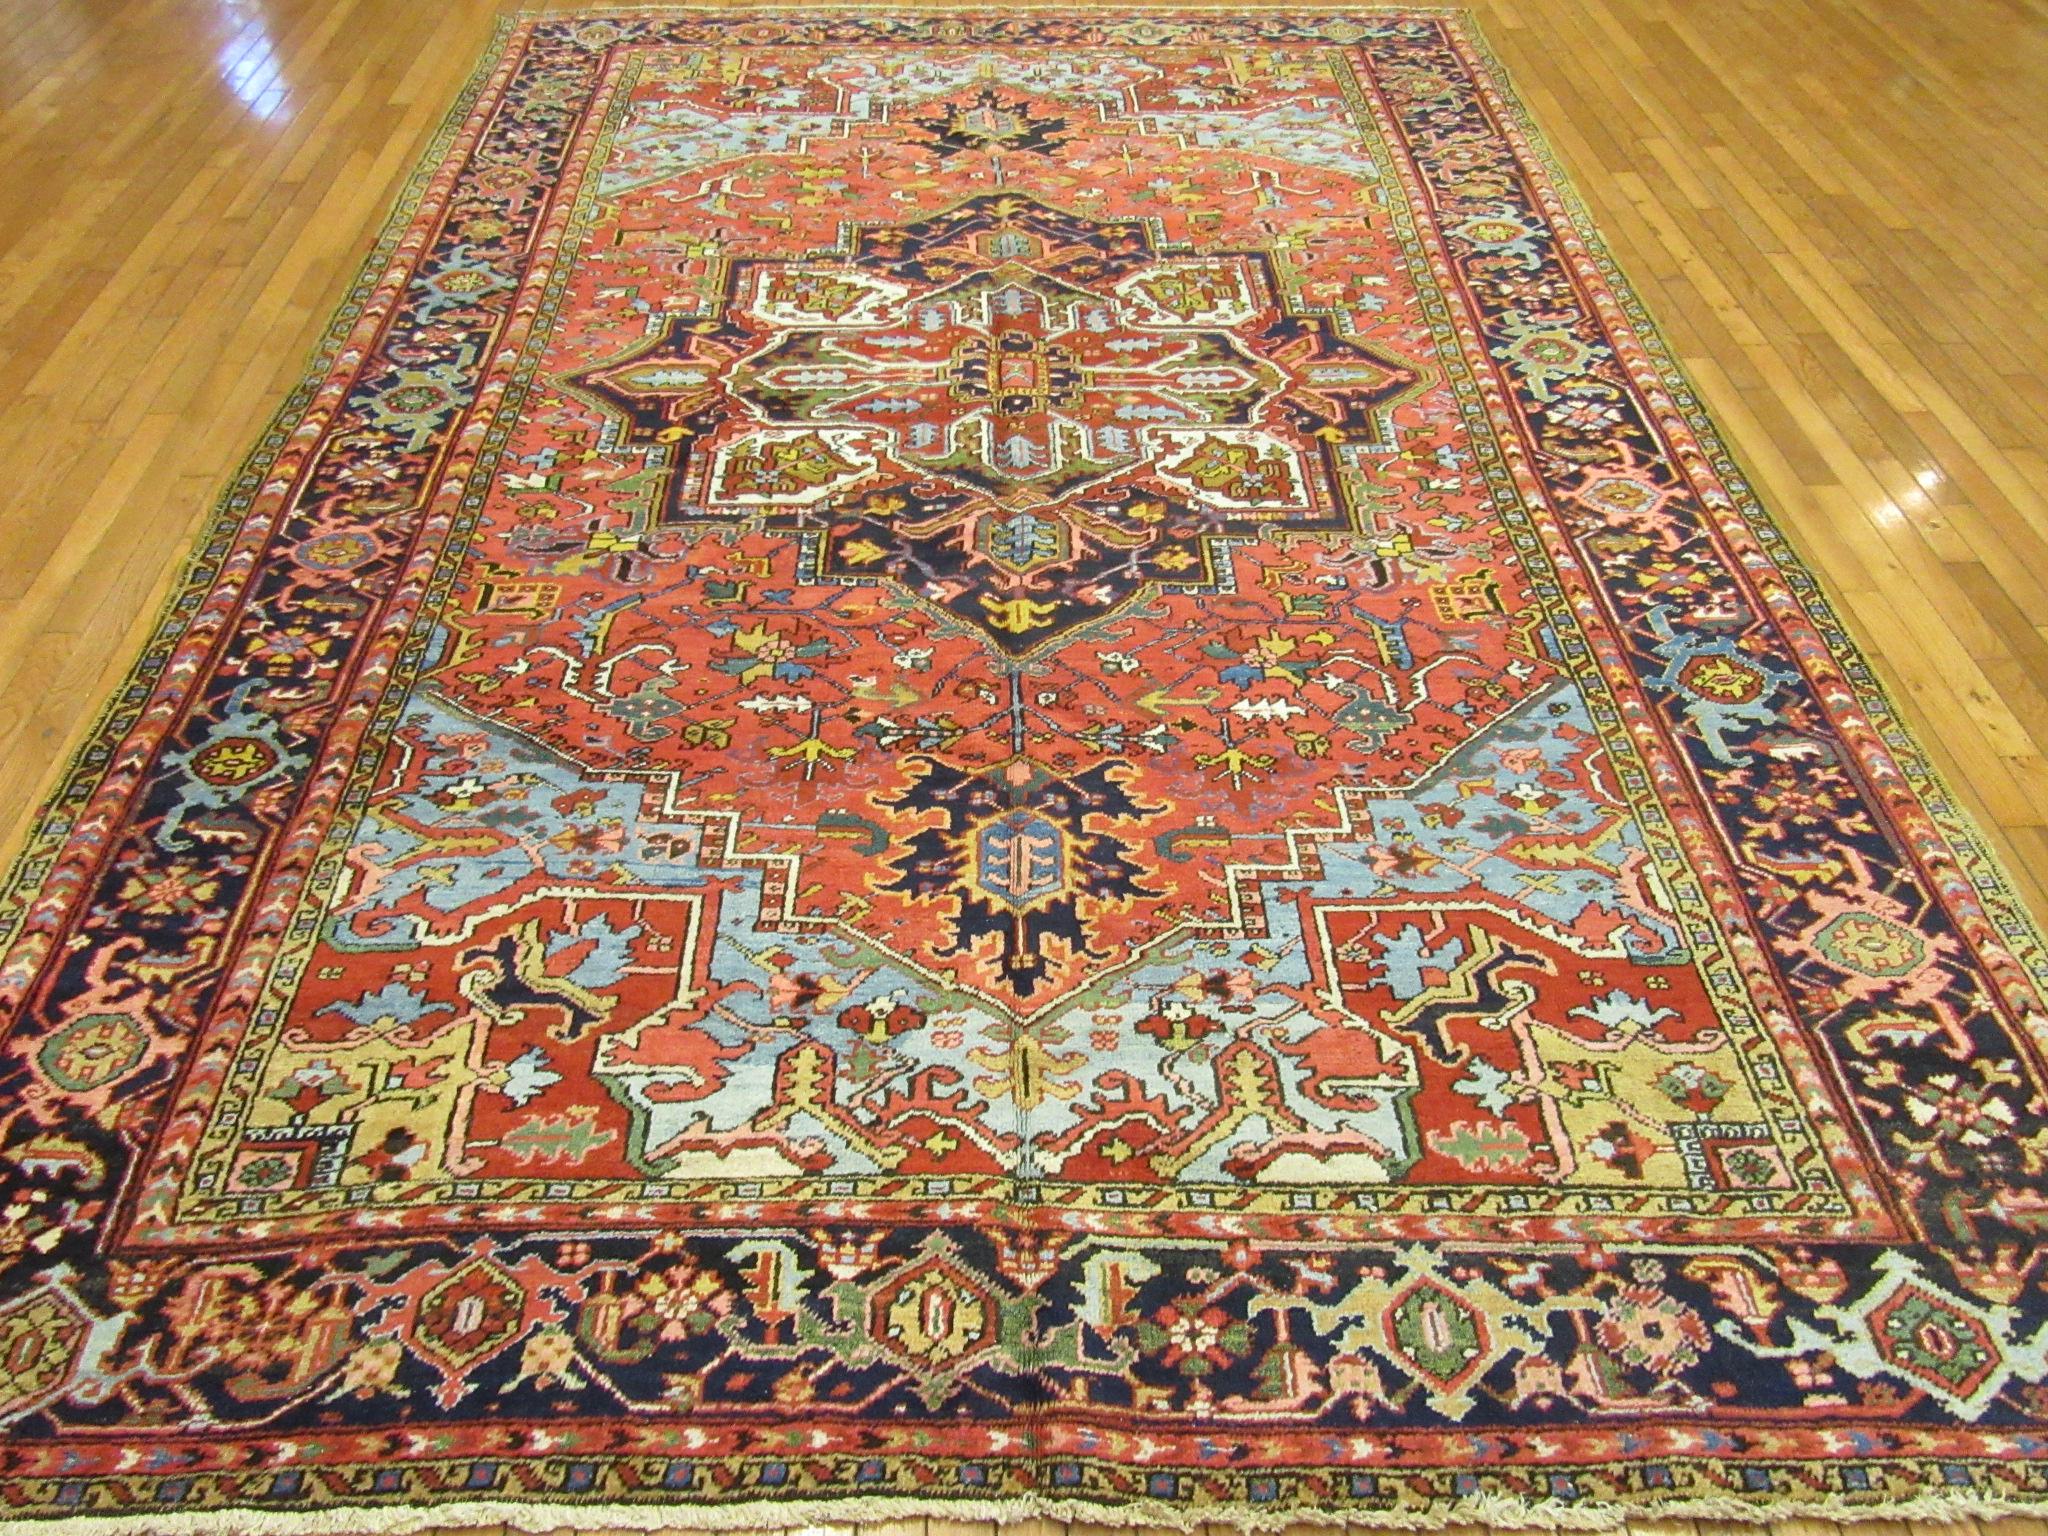 This is a beautiful hand-knotted antique Persian Heriz rug with bright happy colors made with wool and all natural dyes. The rug measures 7'8'' x 12' and is in great condition.